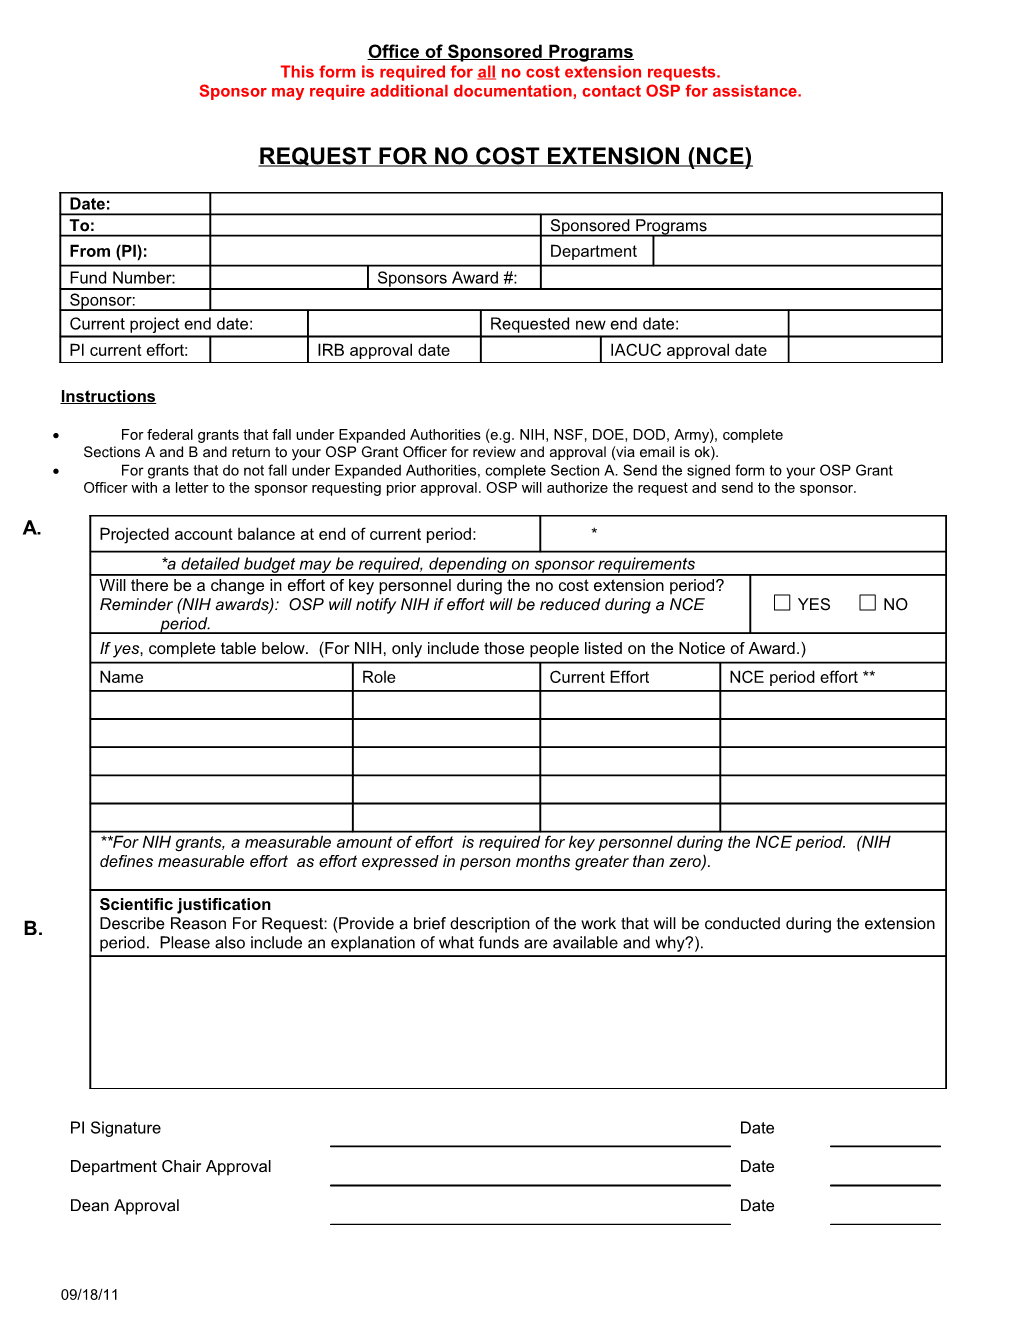 This Form Is Required for All No Cost Extension Requests